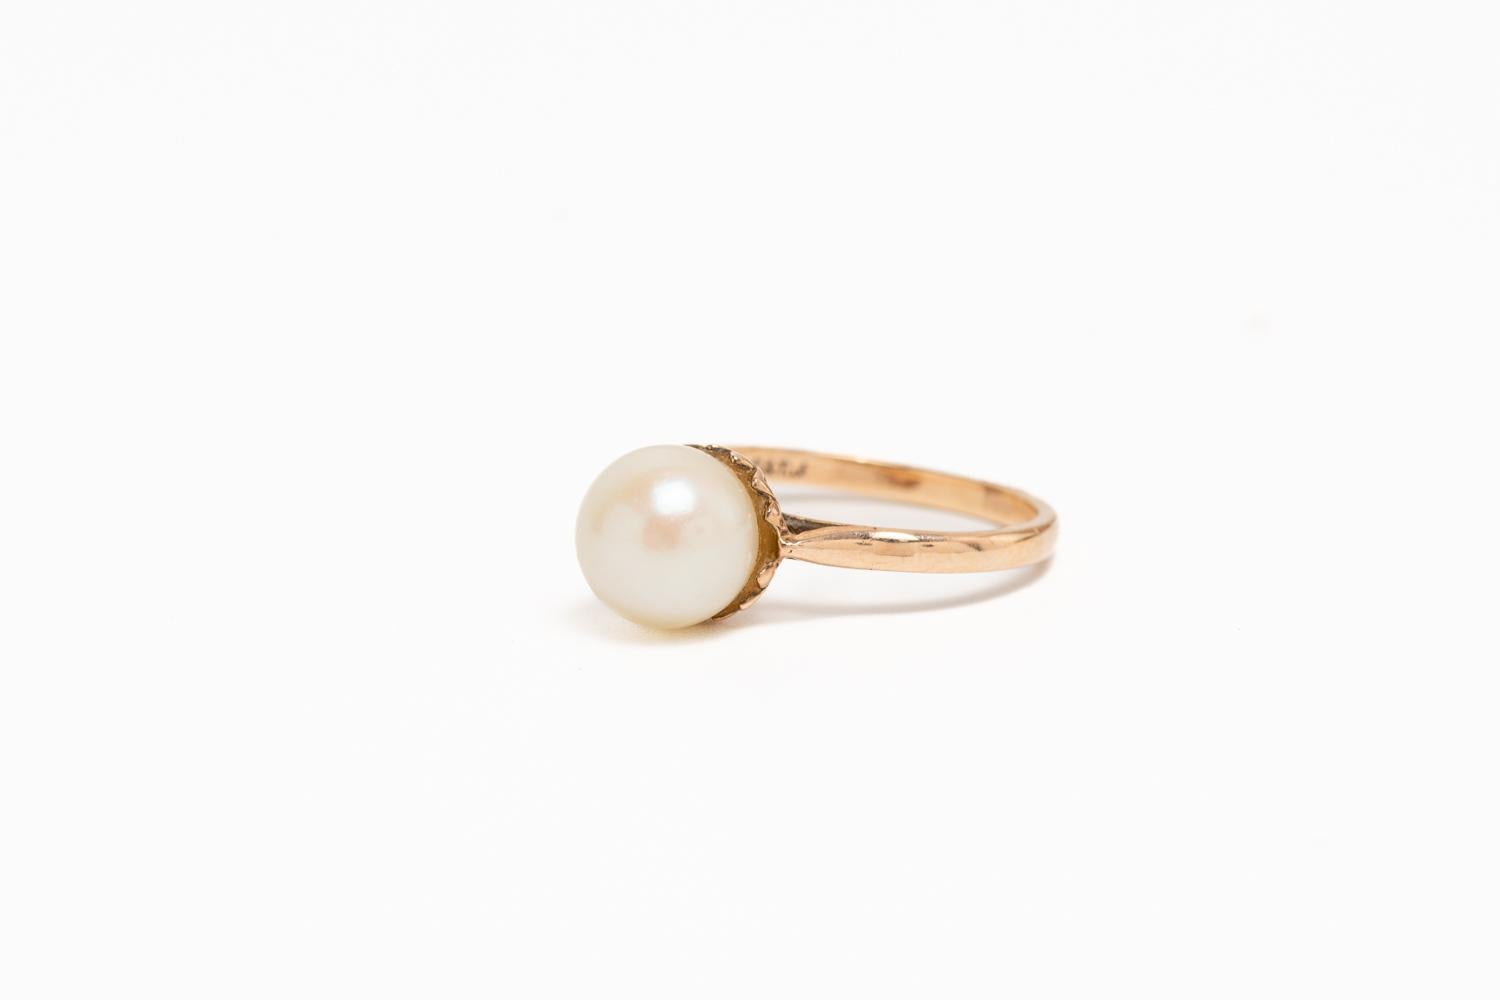 Vintage 9ct Gold Pearl Ring In Excellent Condition For Sale In Portland, GB